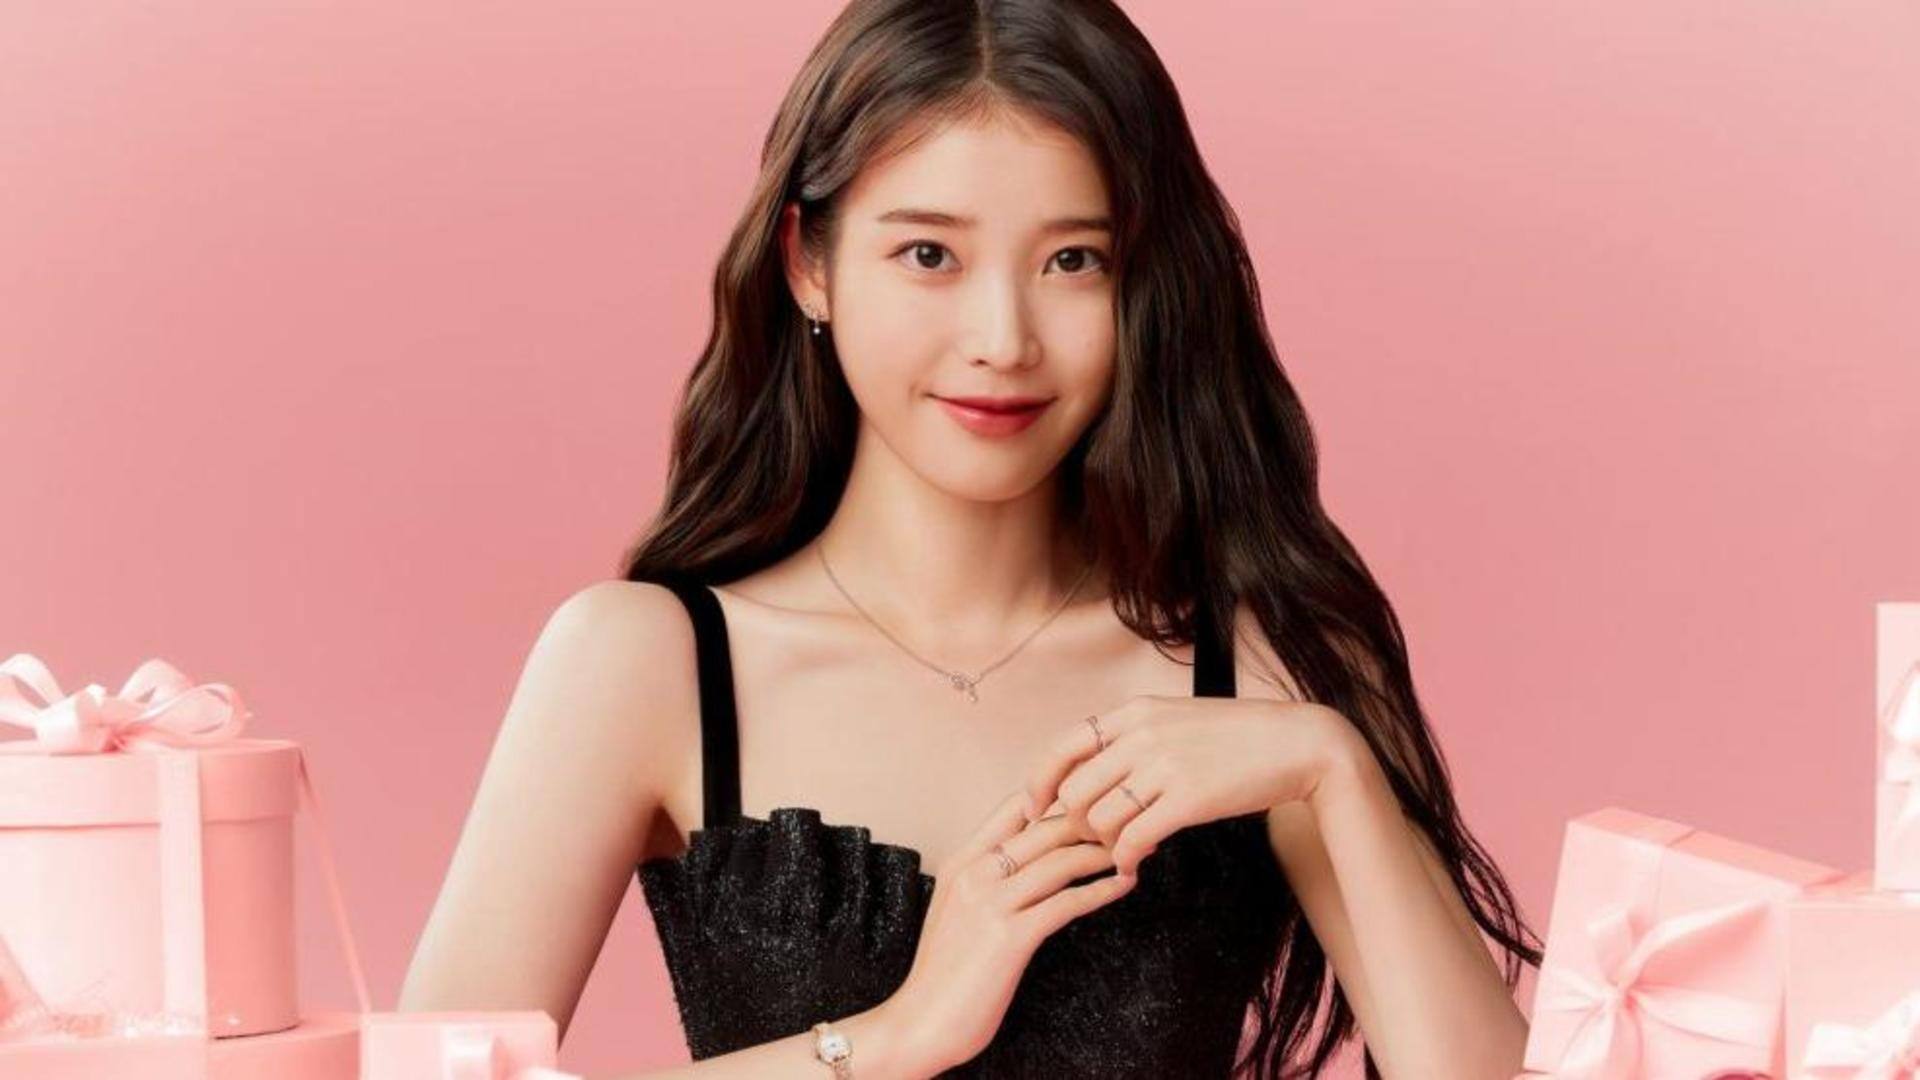 IU's agency releases statement amid plagiarism accusation; condemning malicious intent